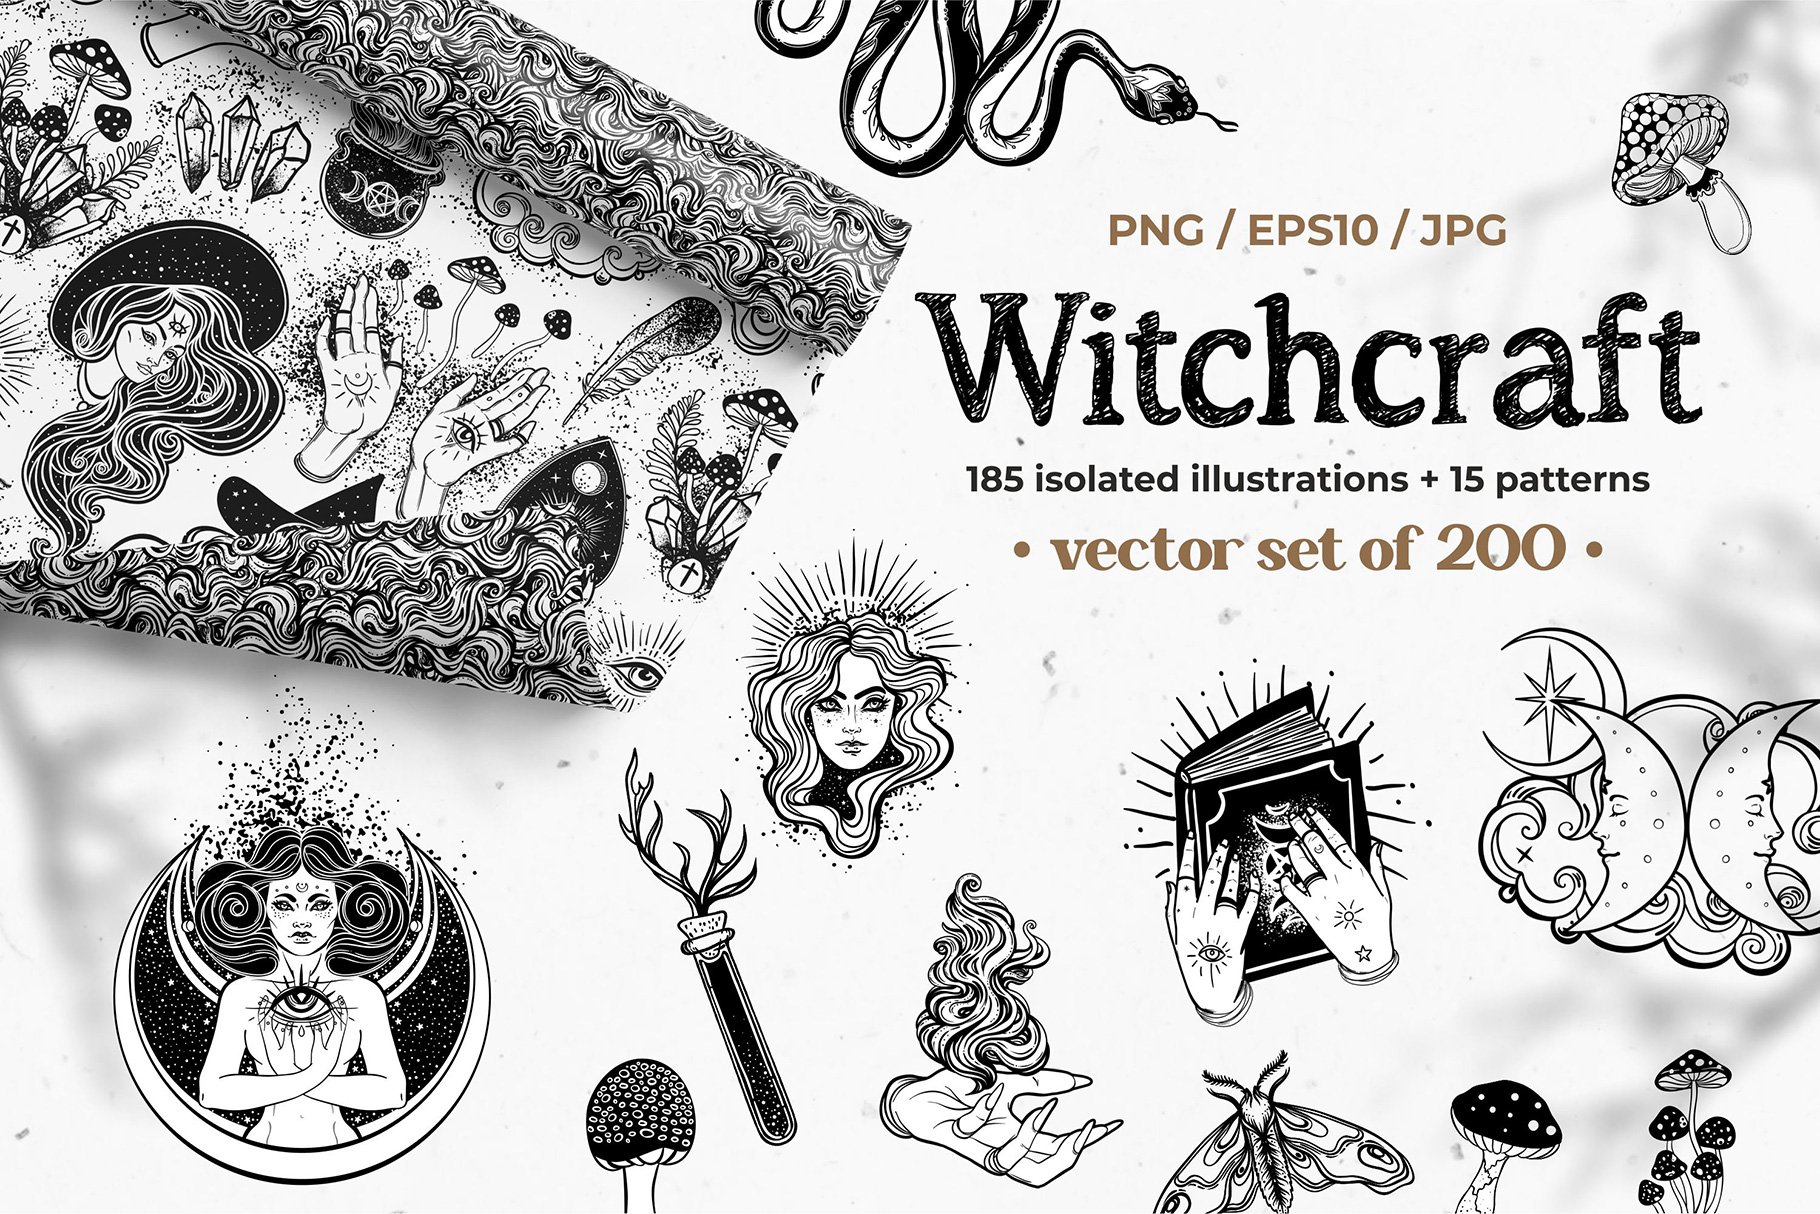 Witchcraft vector set of 200 cover image.